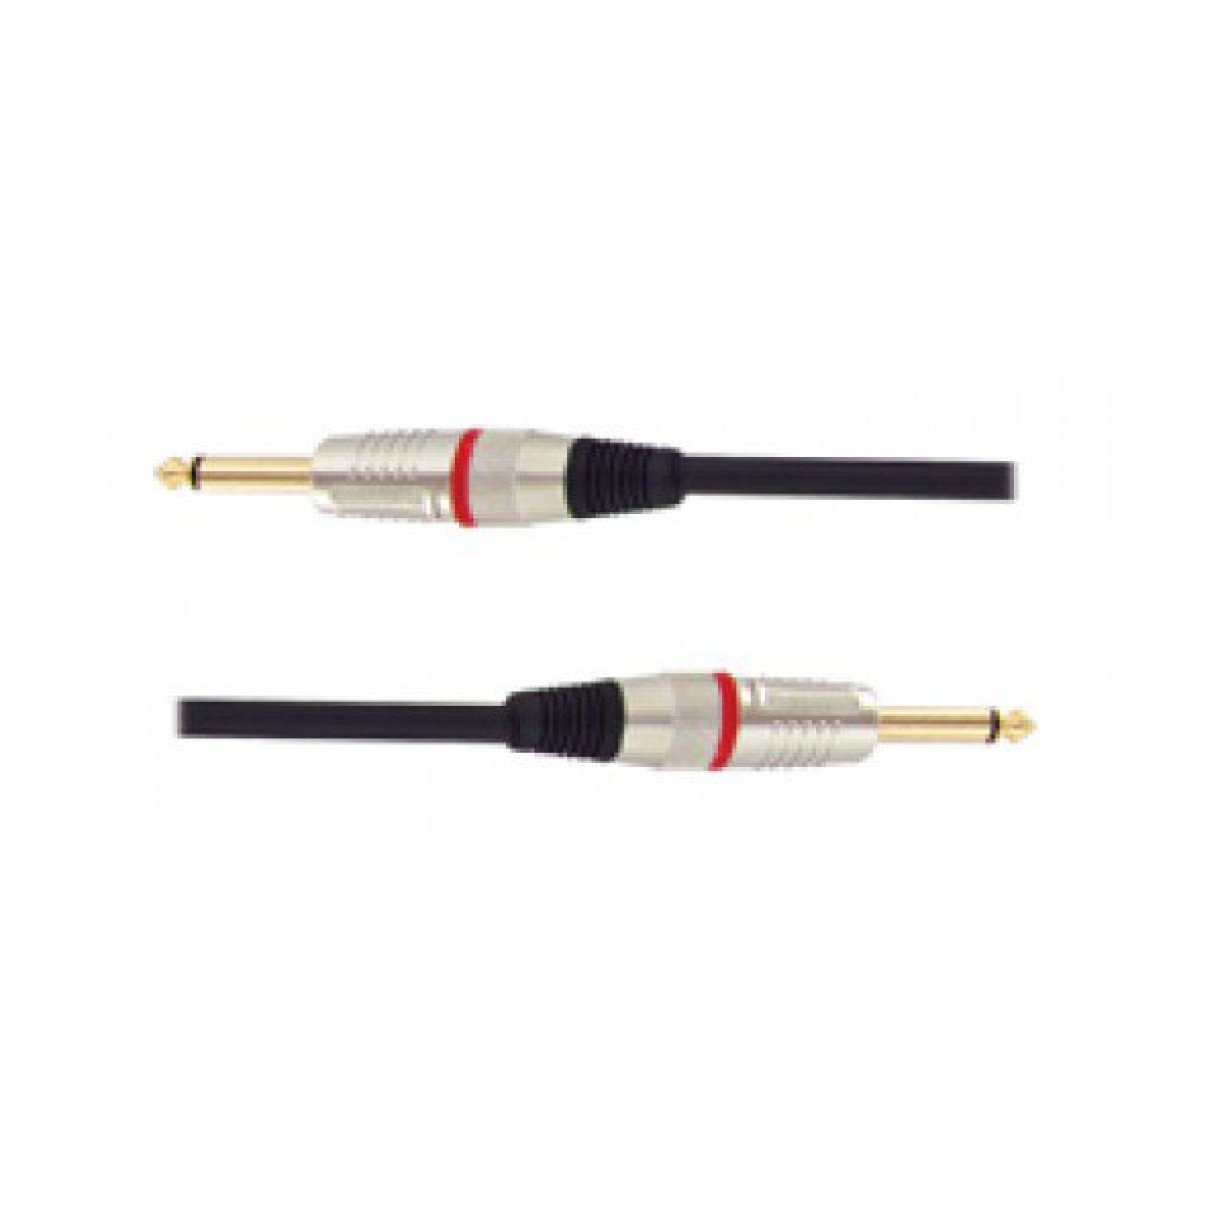 Carson Rocklines RSH05 5 foot 1/4 inch Speaker Cable